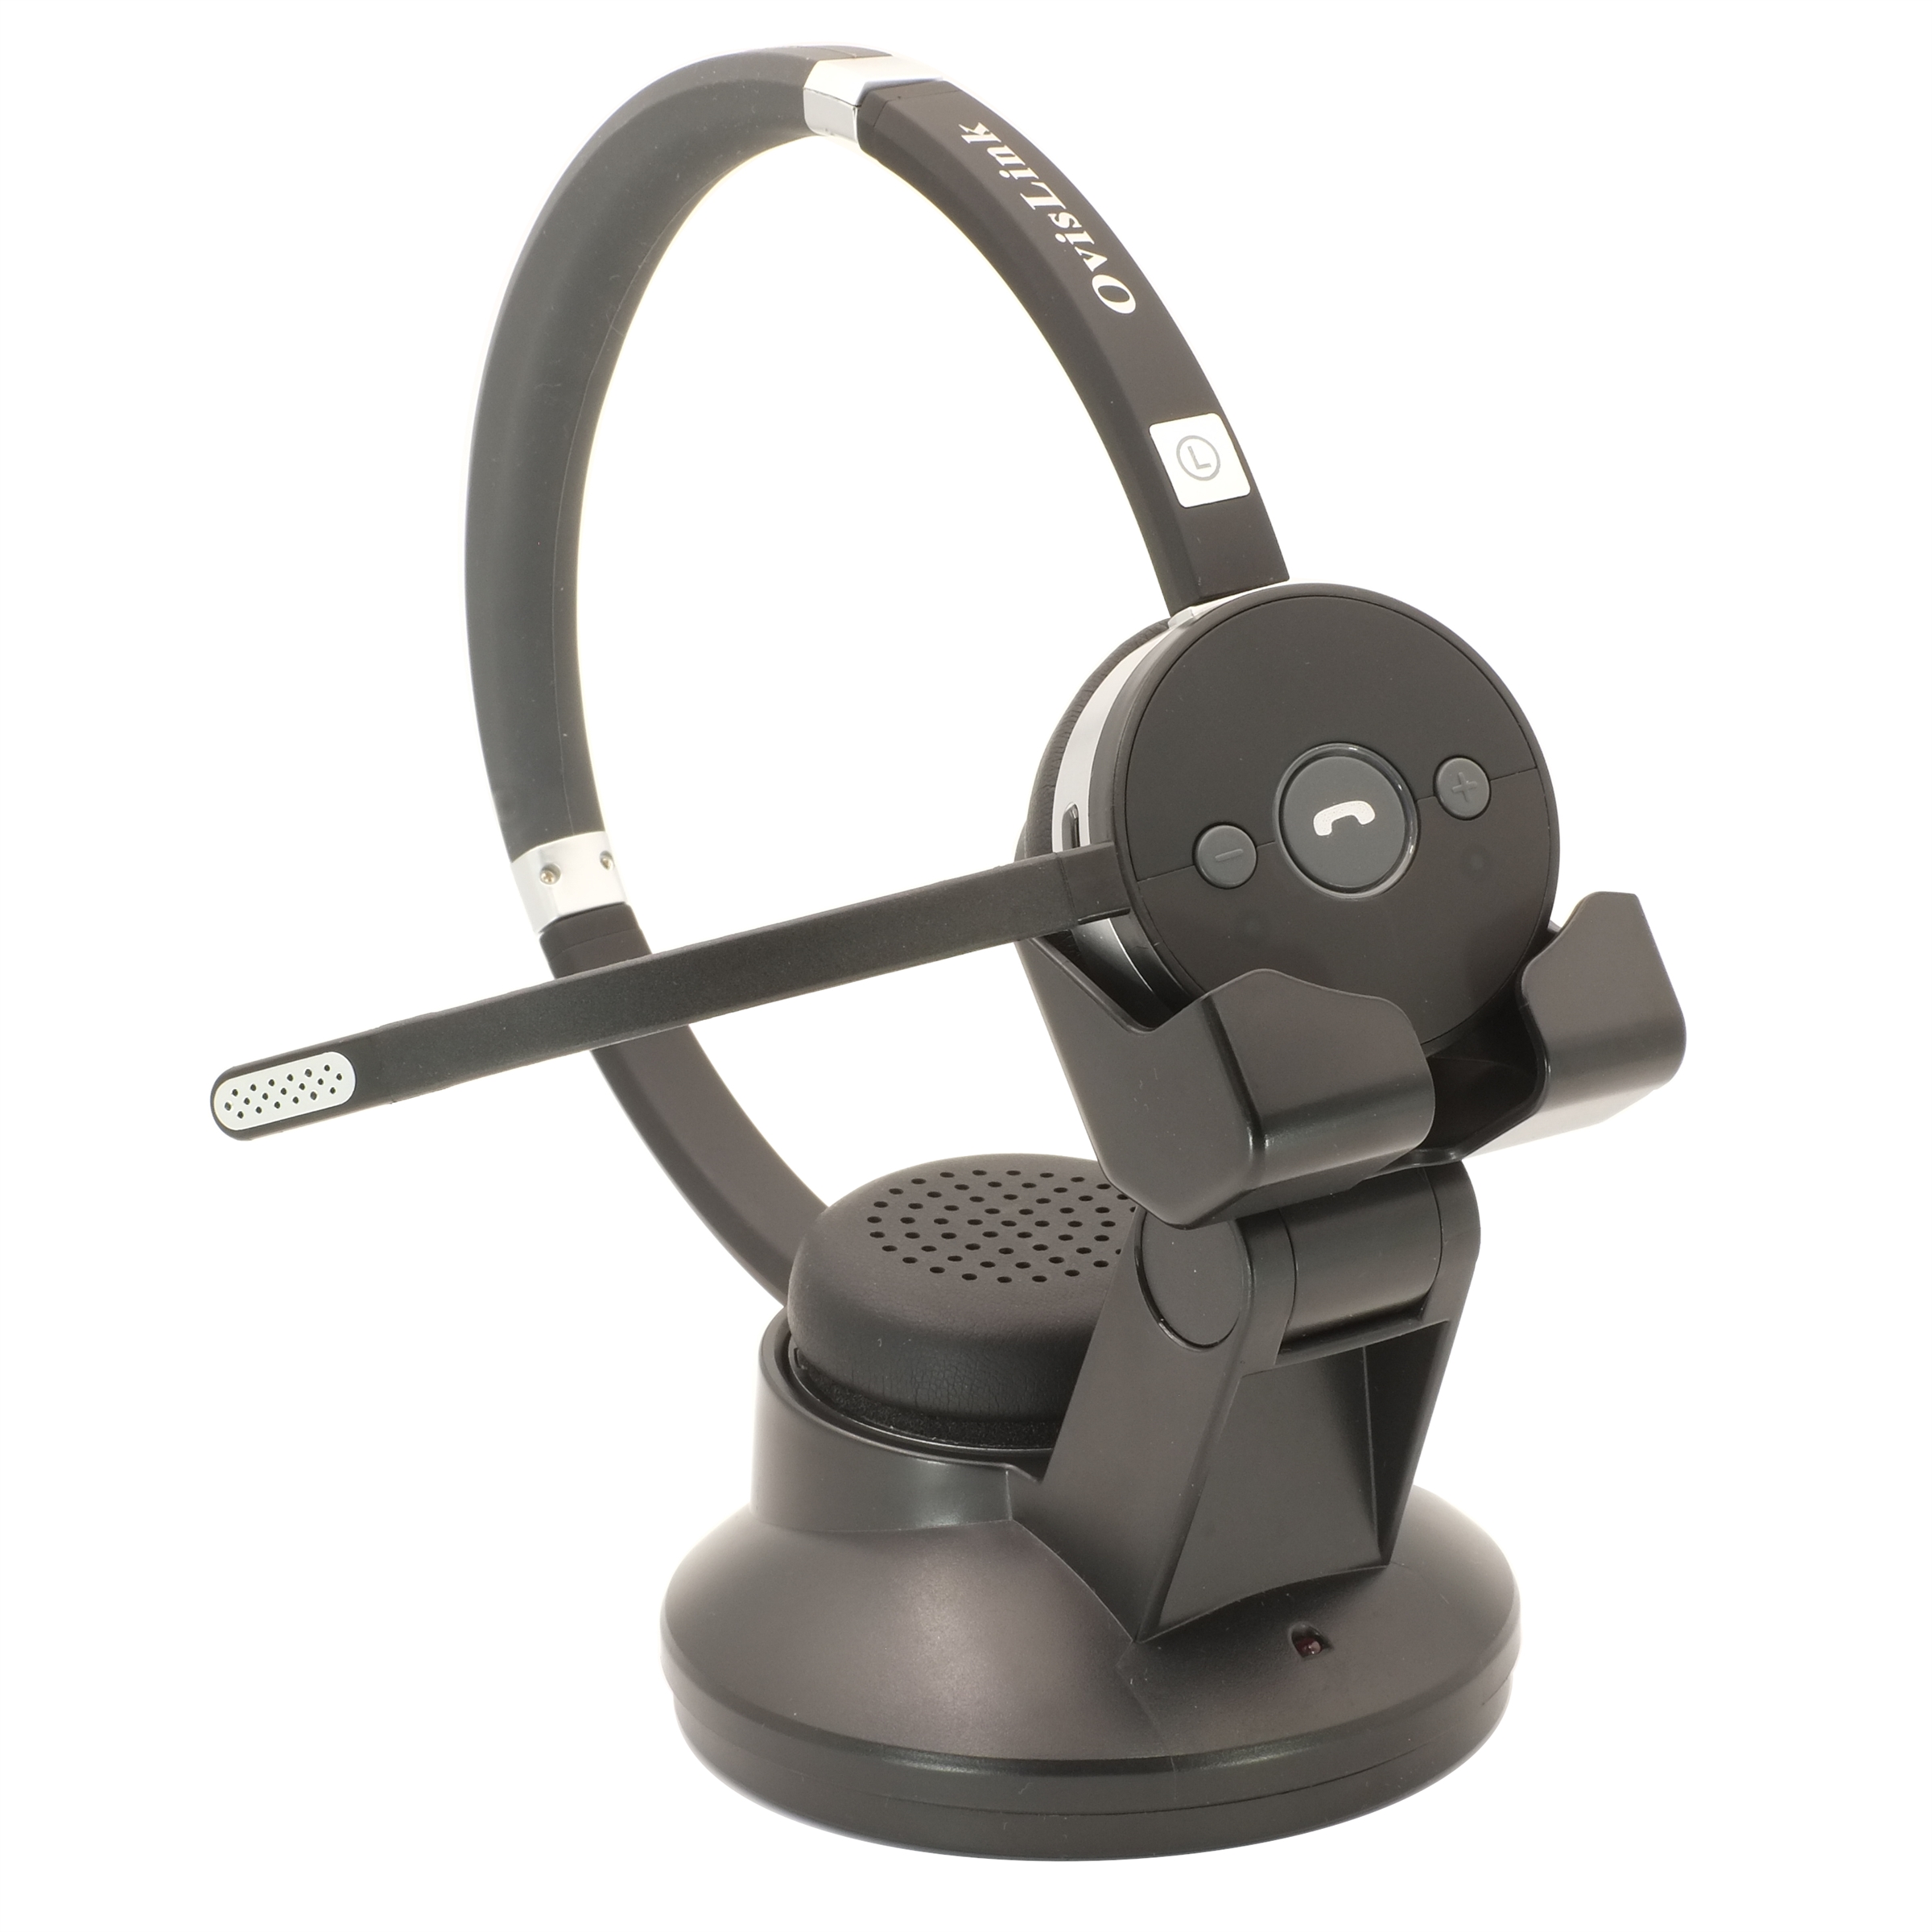 Dual Ear Wireless Call Center Headset compatible with all computers, cell  phones and desktop phones support Bluetooth headset function. Compatible  with Polycom Mitel FortiFone Allworx AT&T and more